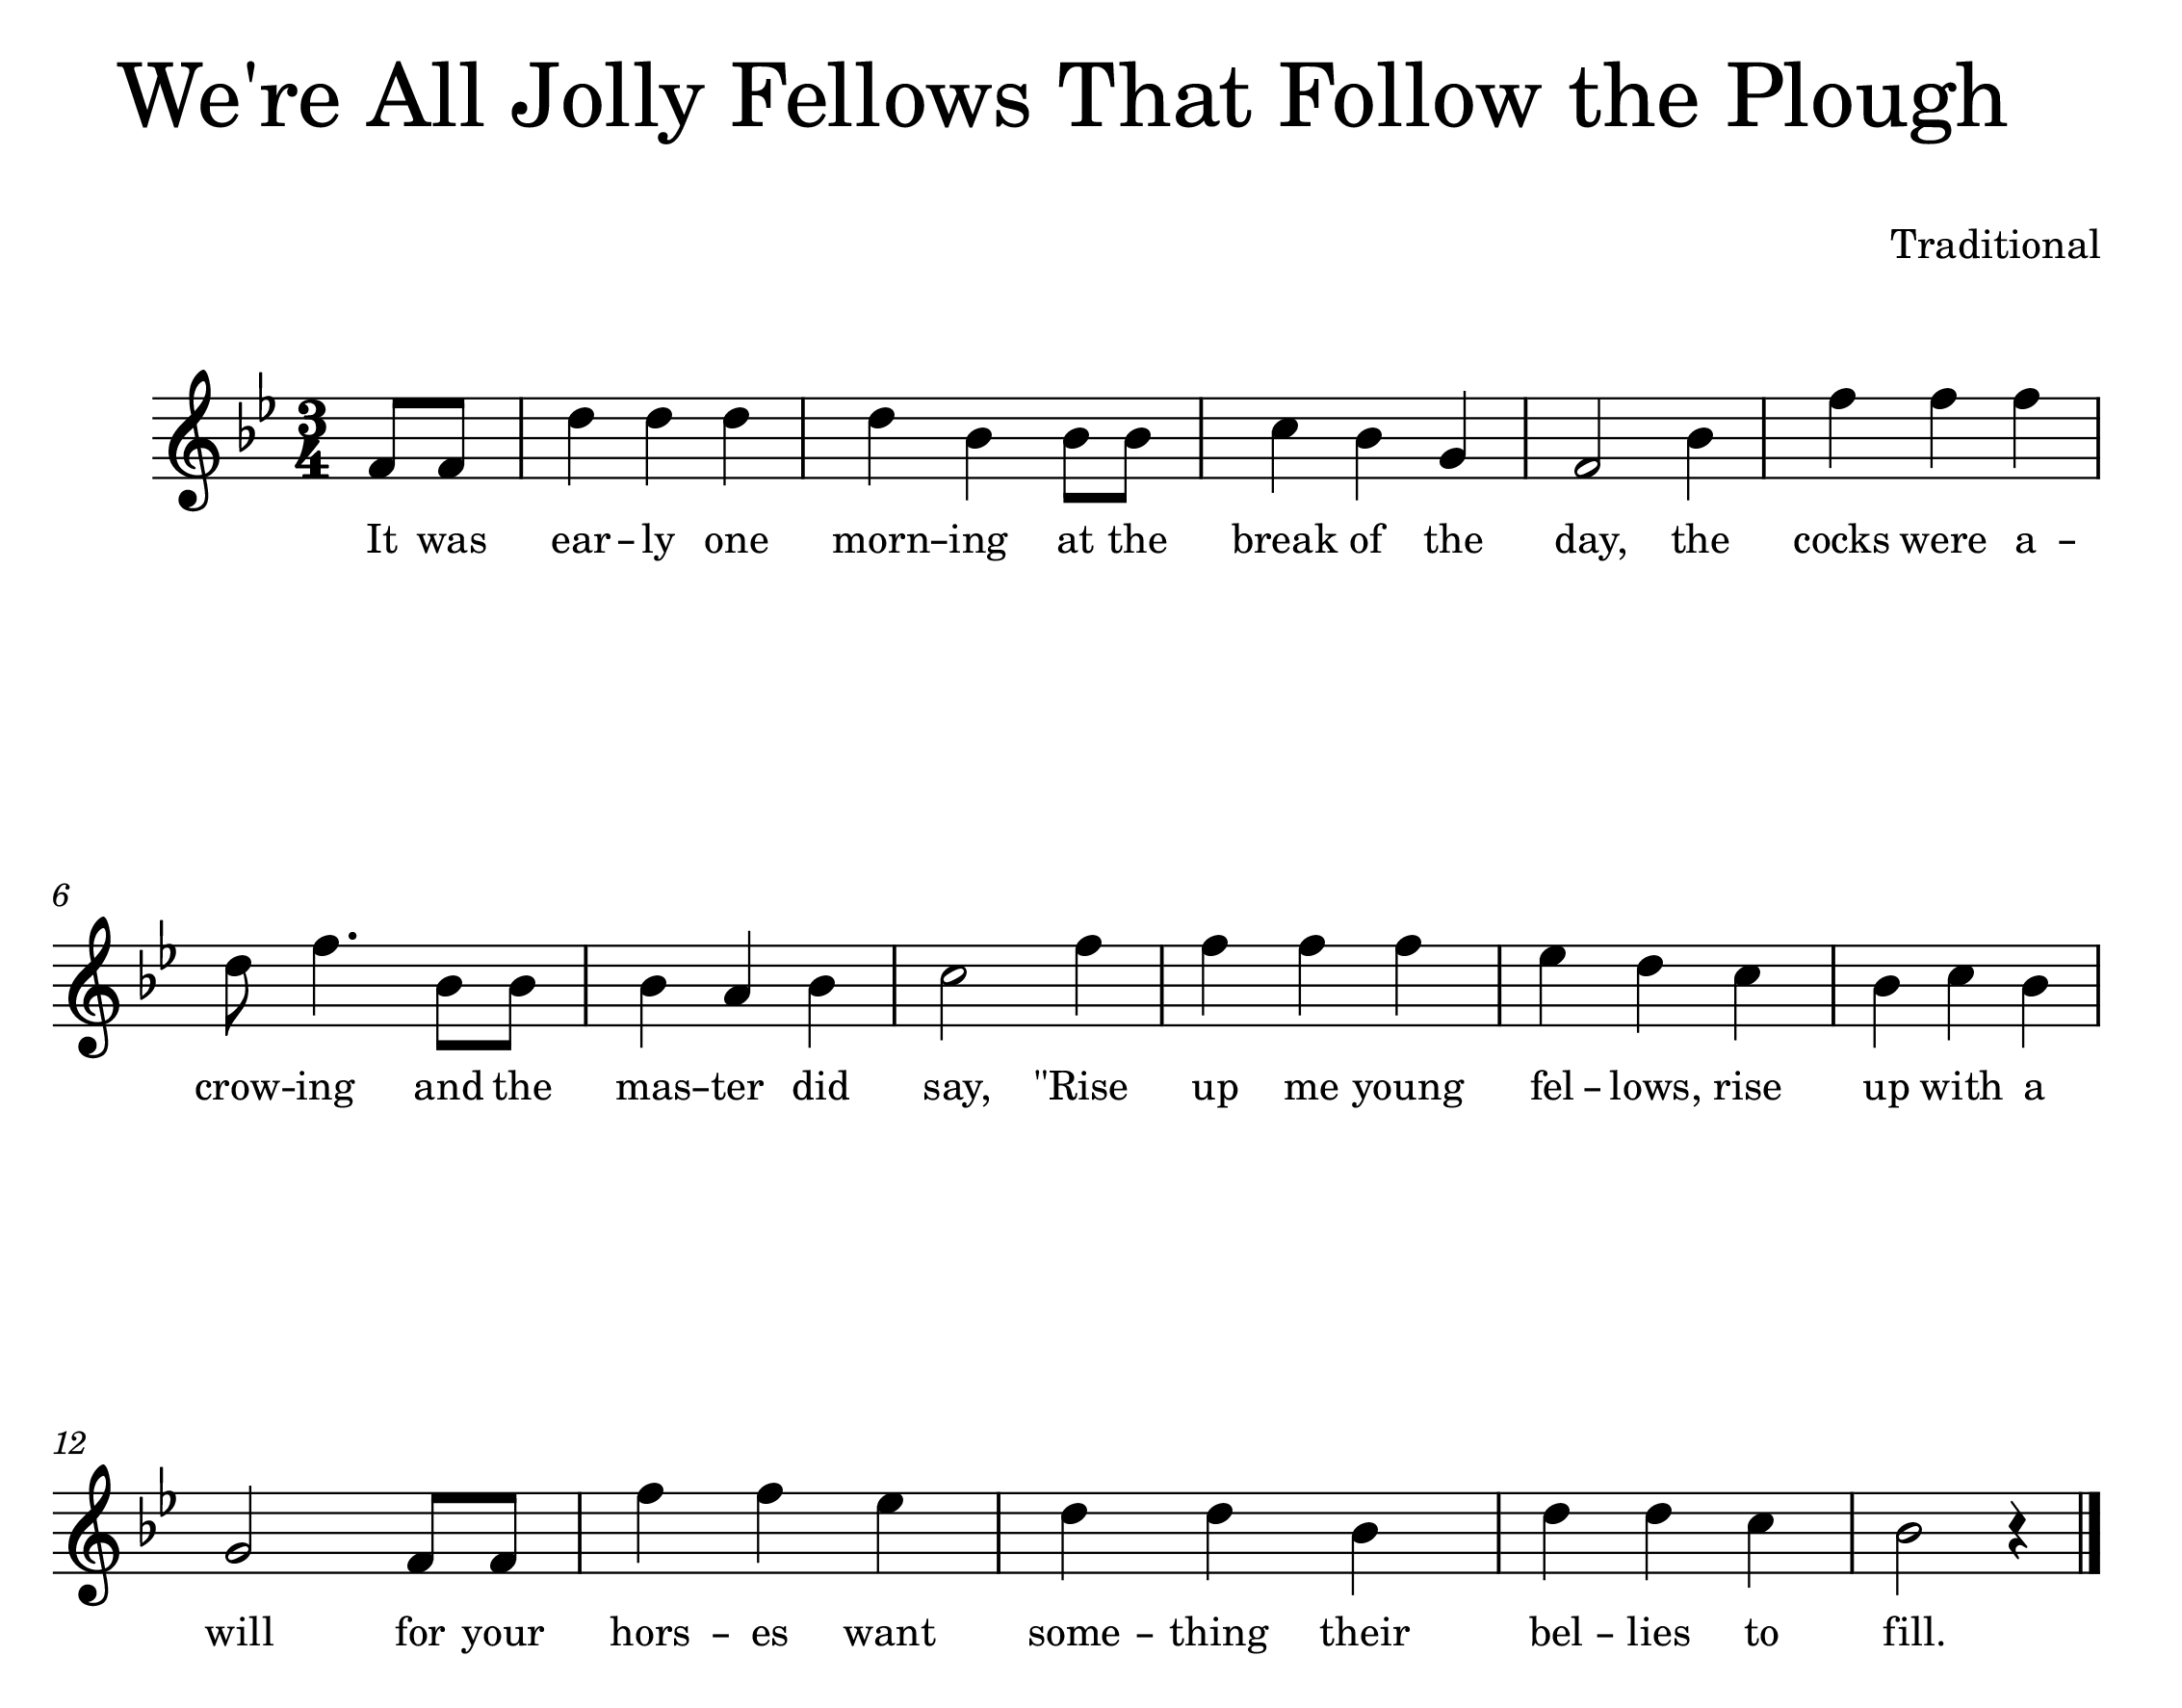 Sheet music for "We're All Jolly Fellows that Follow the Plough"